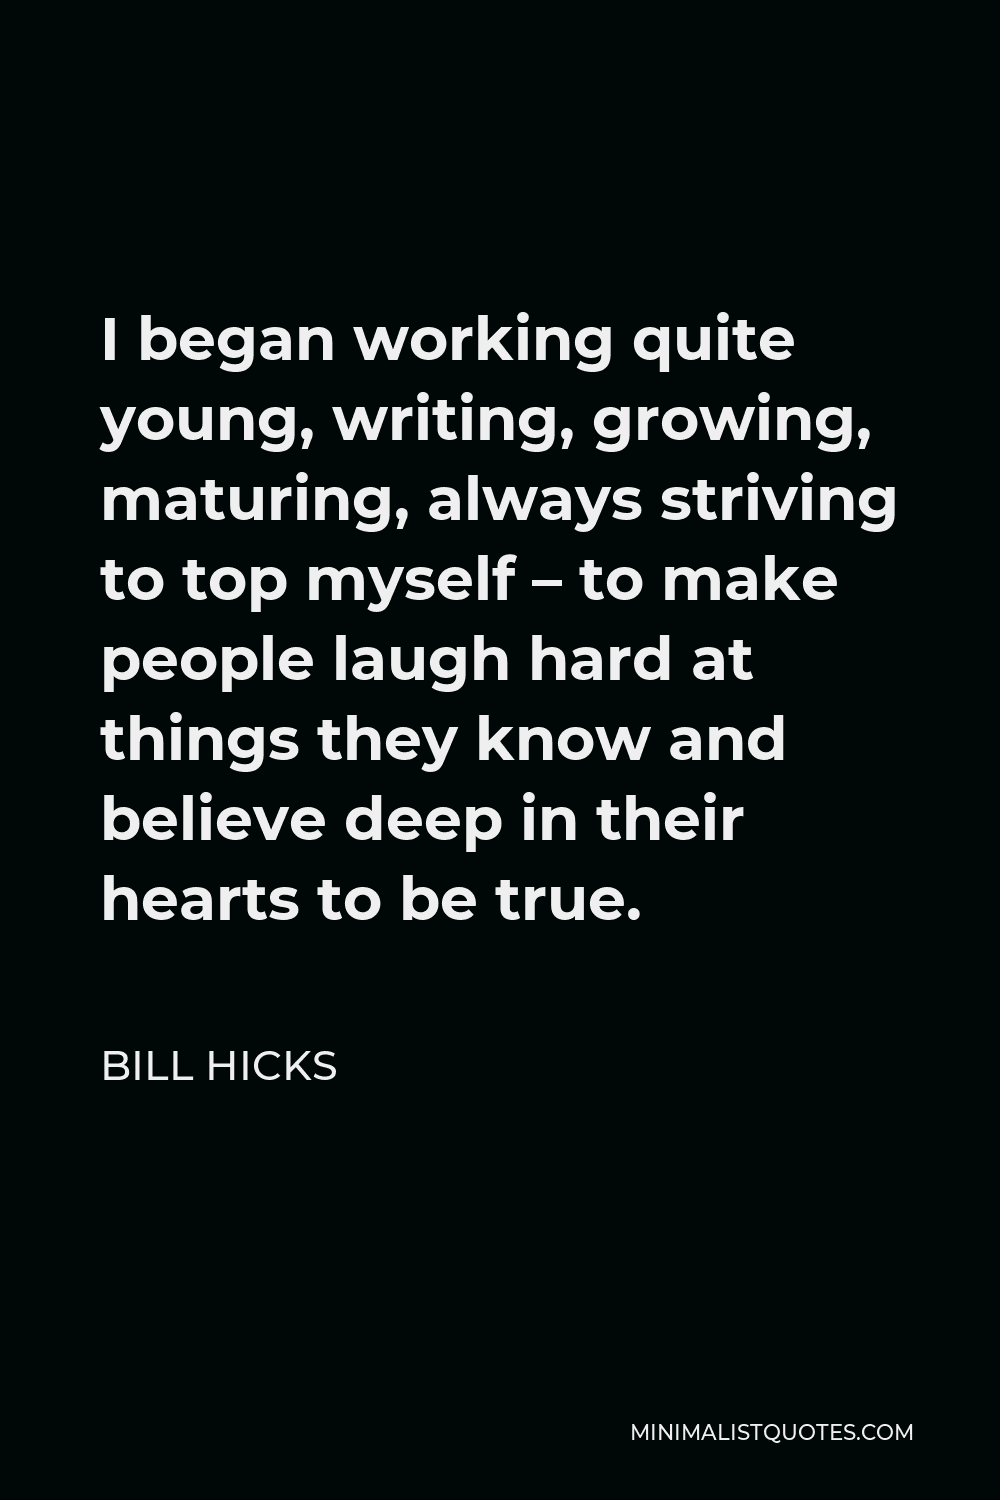 Bill Hicks Quote - I began working quite young, writing, growing, maturing, always striving to top myself – to make people laugh hard at things they know and believe deep in their hearts to be true.